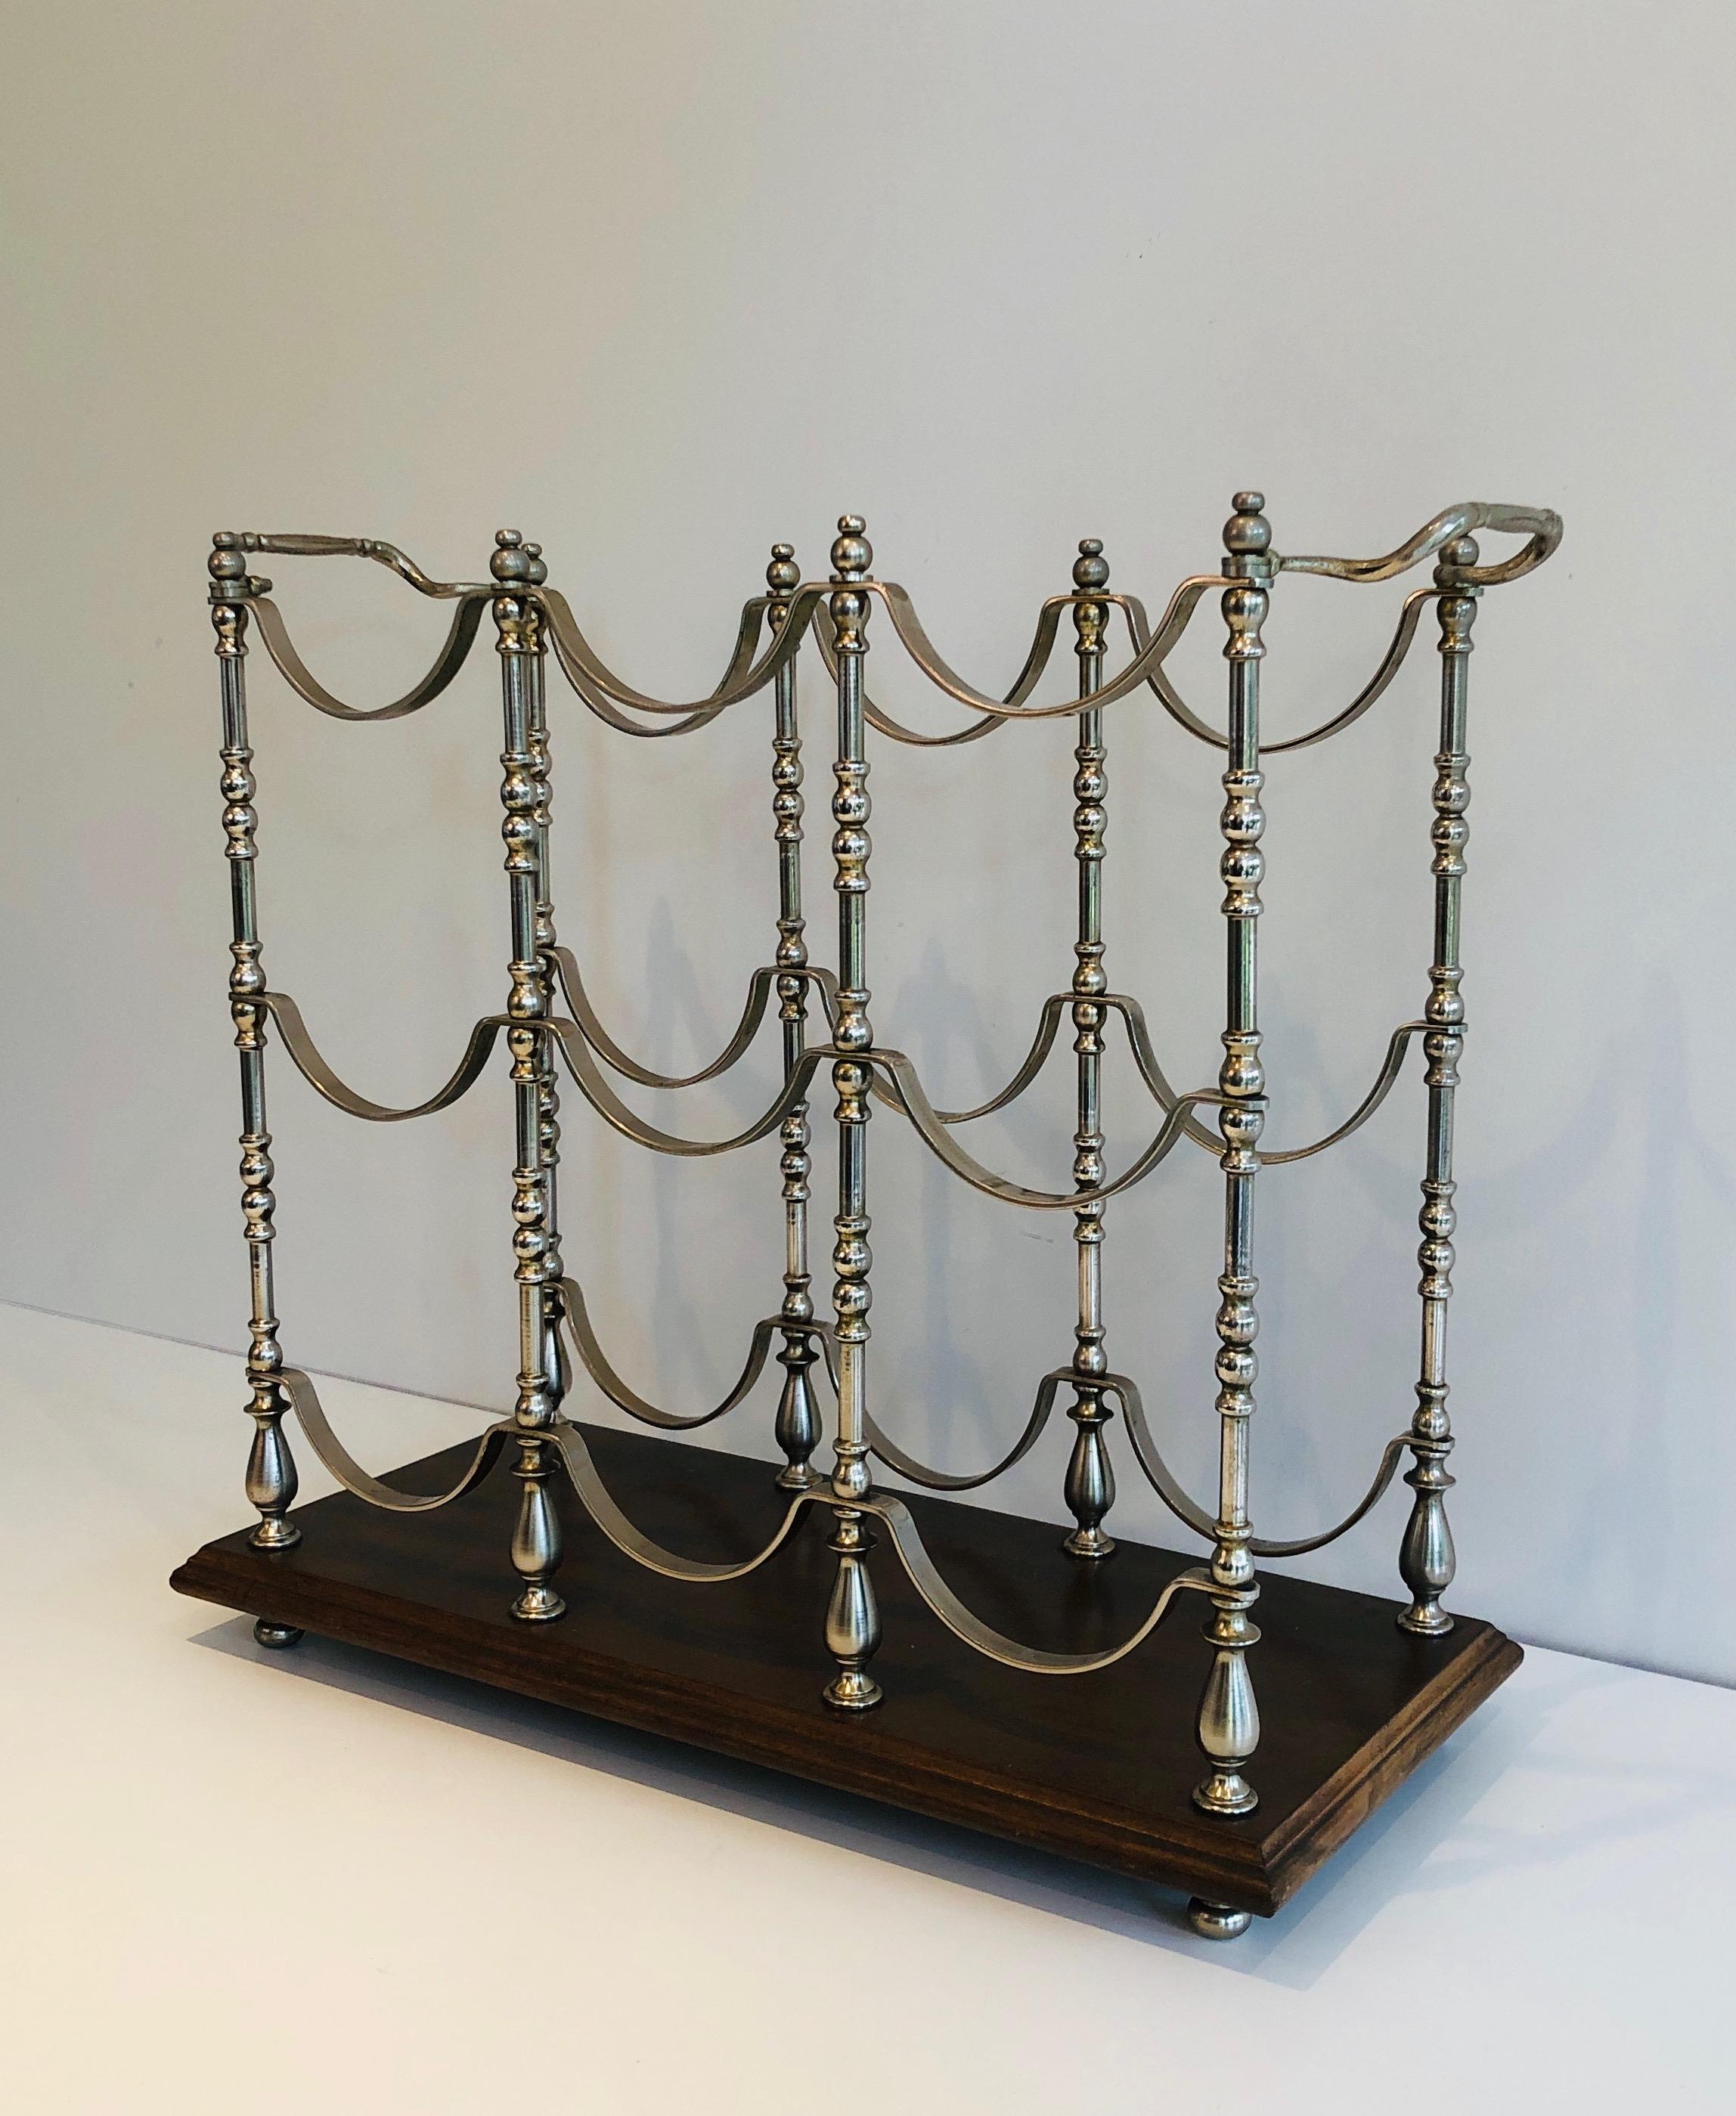 Silvered Metal Bottles Holder on a Wooden Base, French, Circa 1960 For Sale 9